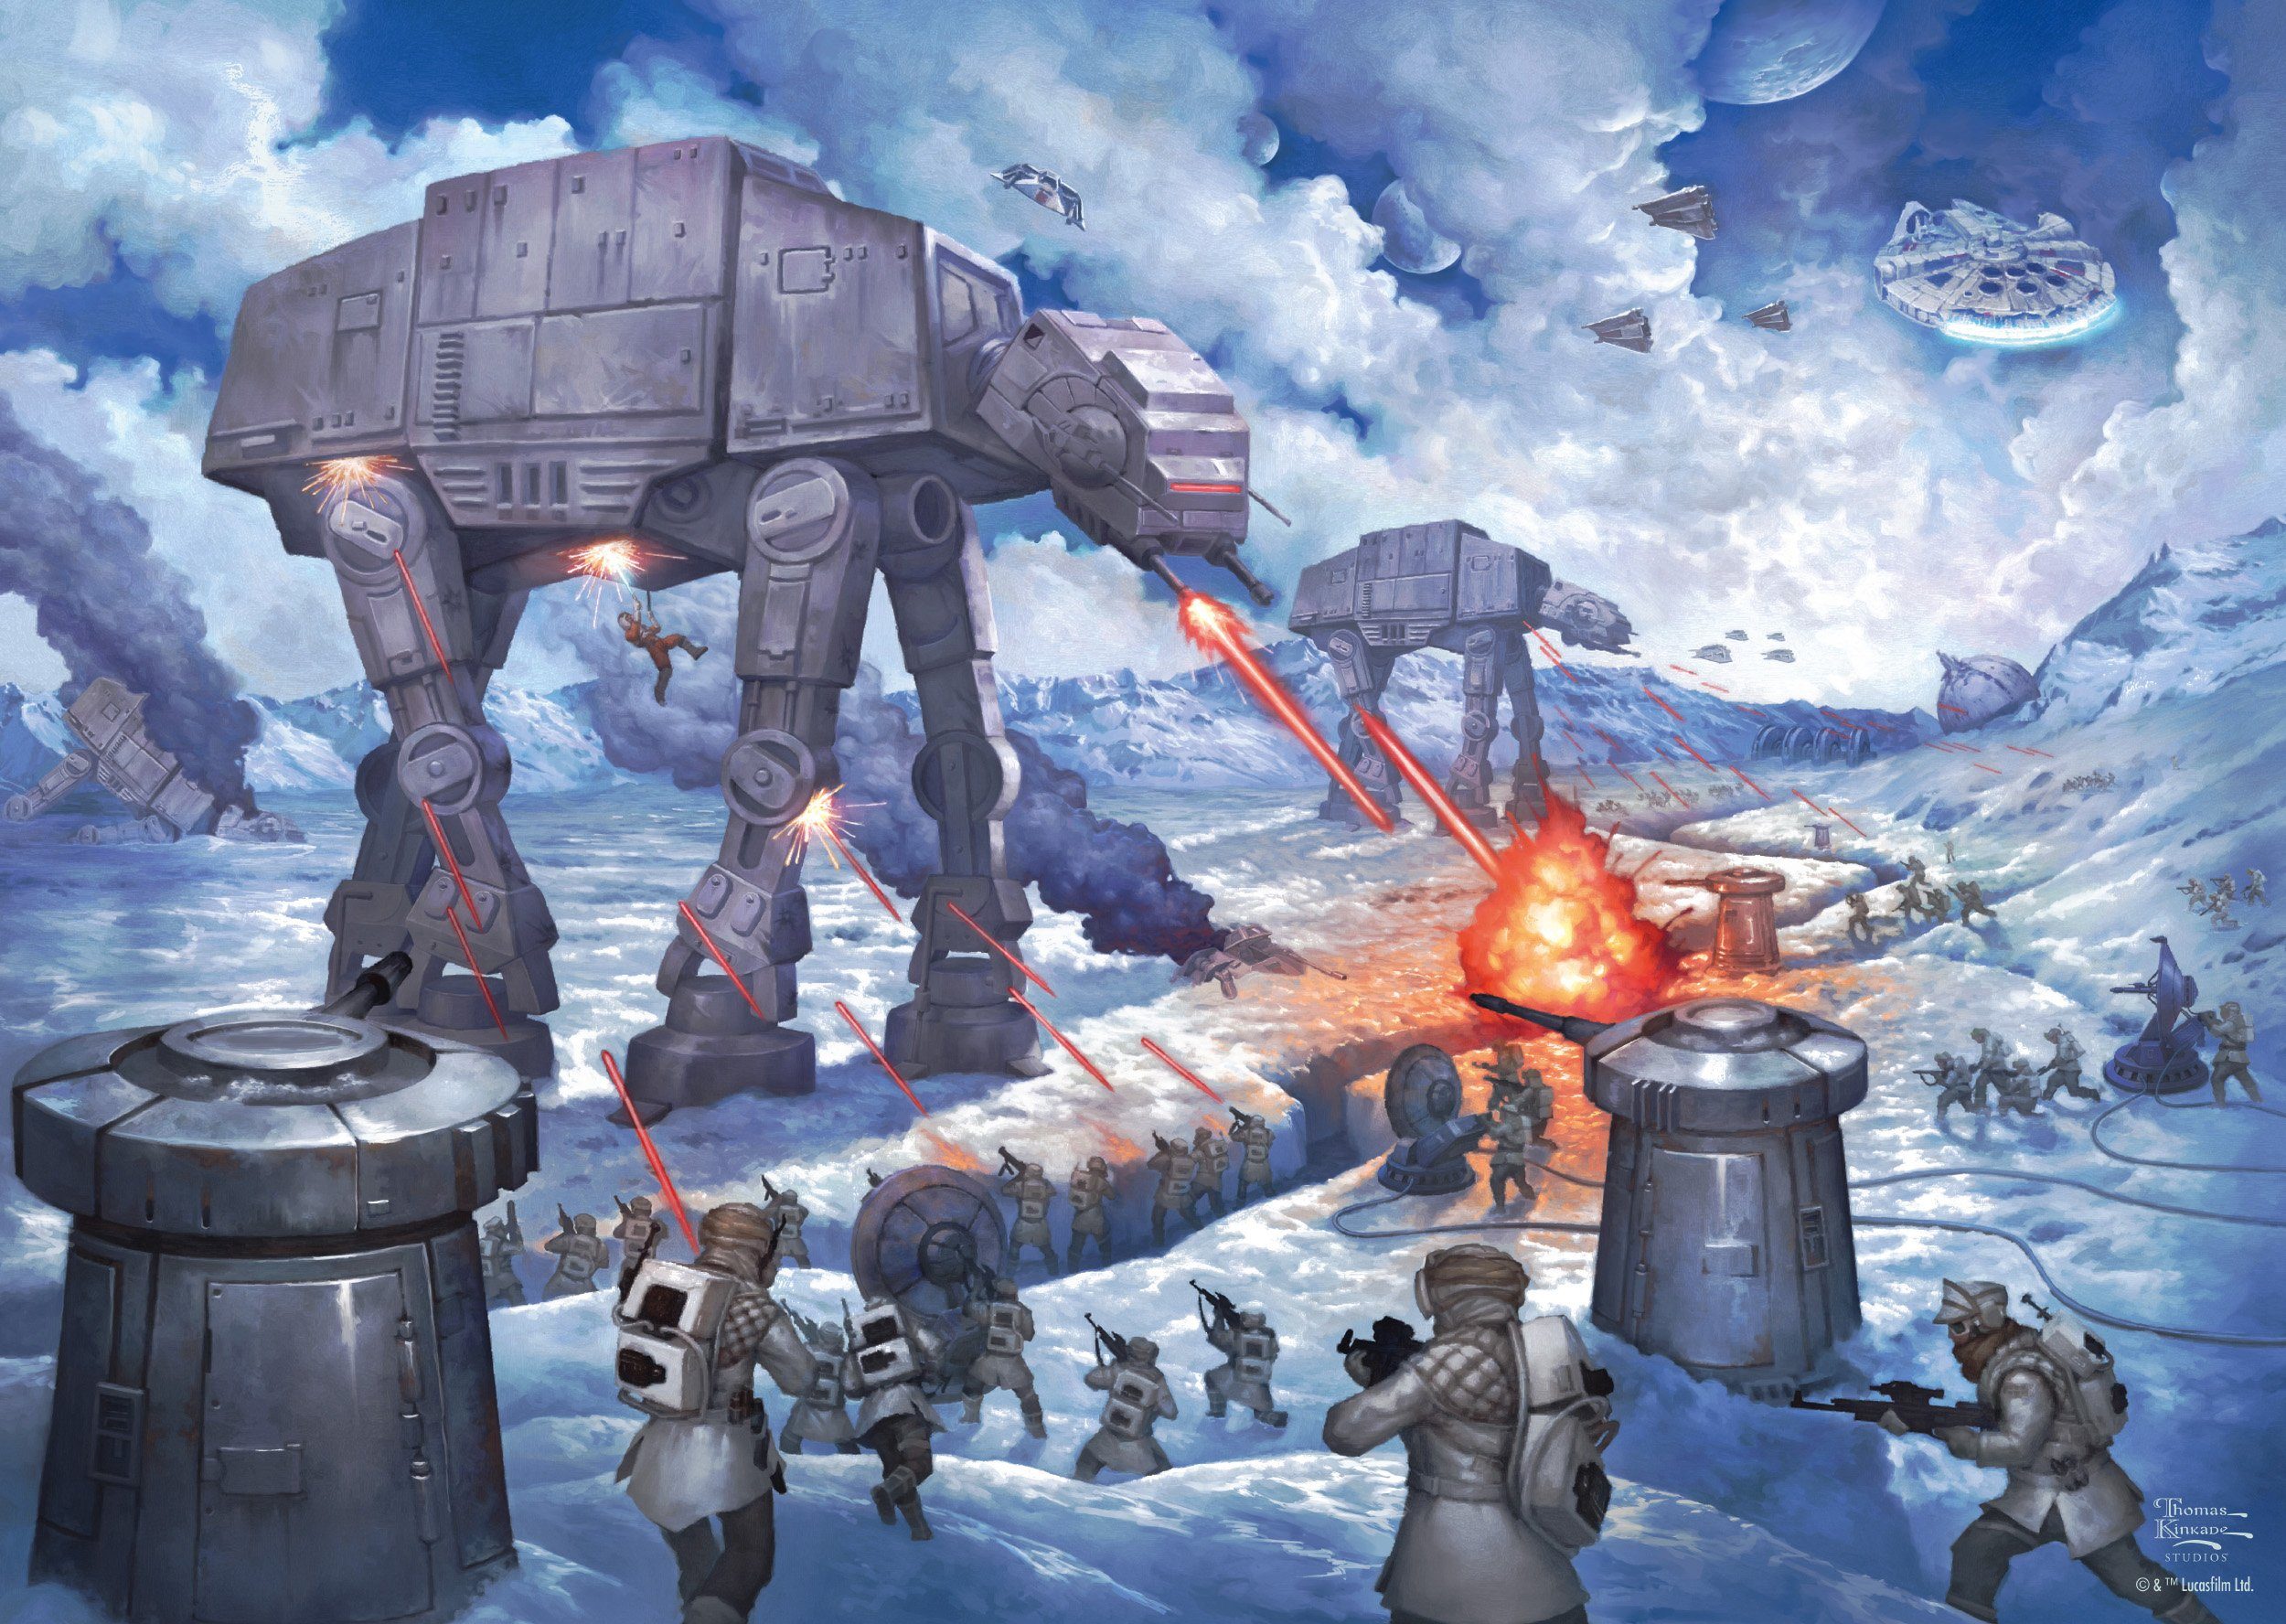 Schmidt Spiele Puzzle Hoth, The 1000 of Battle Made Europe Puzzleteile, in